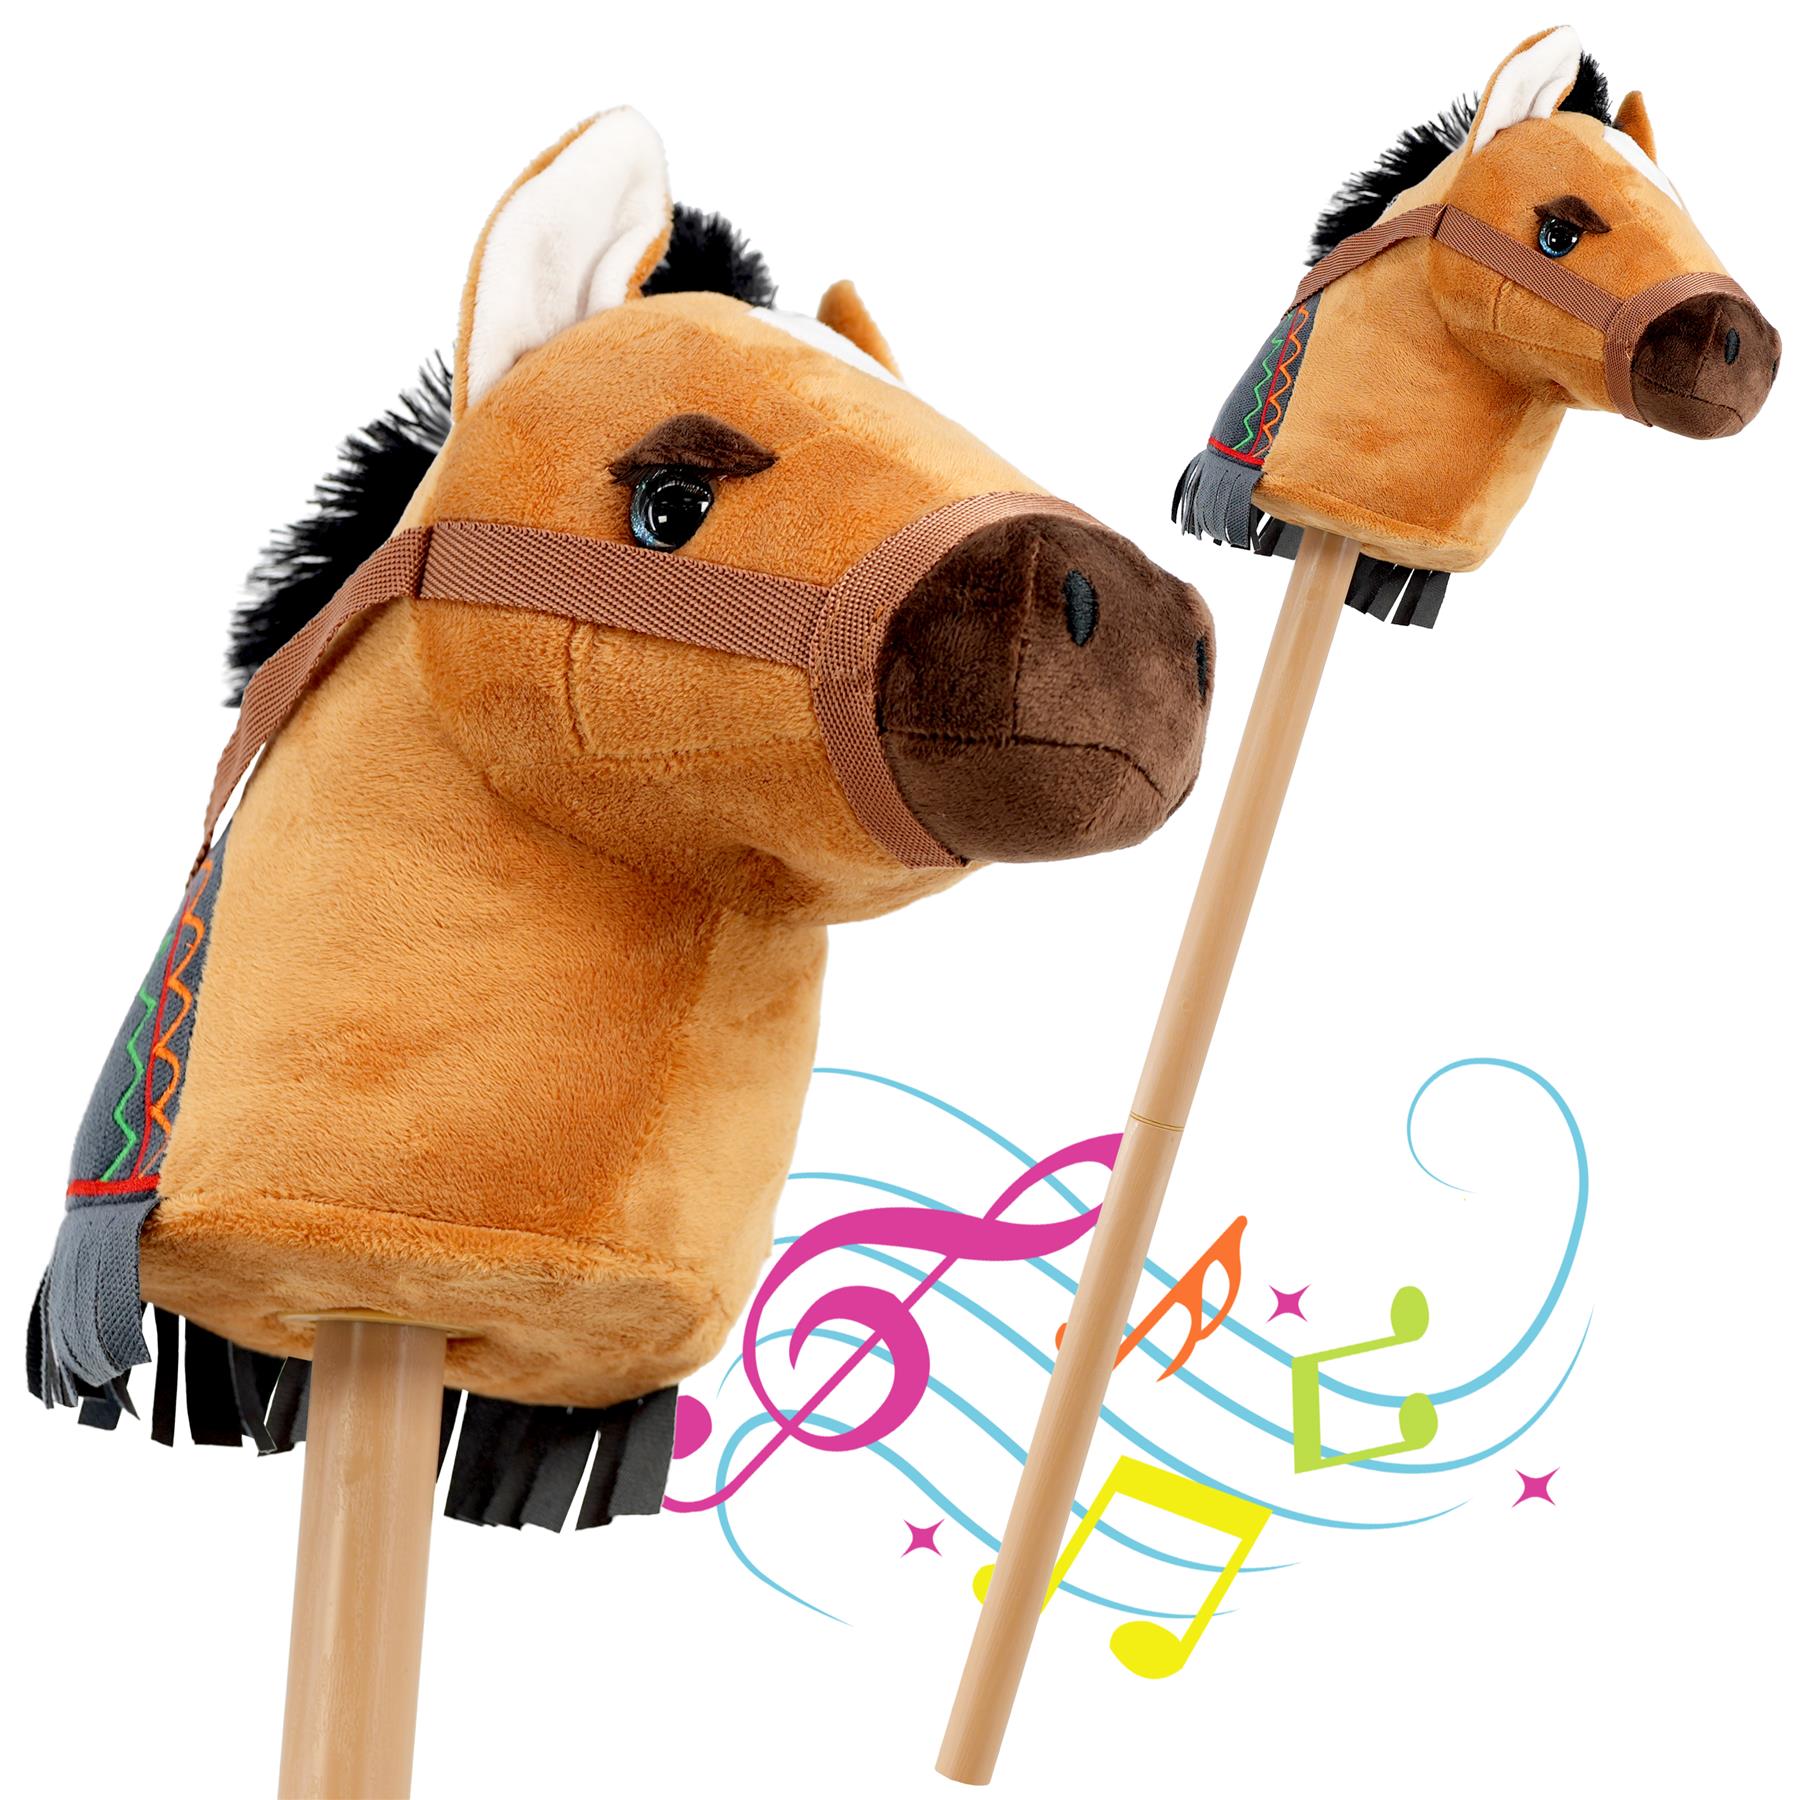 The Magic Toy Shop Kids Brown Hobby Horse with Sounds